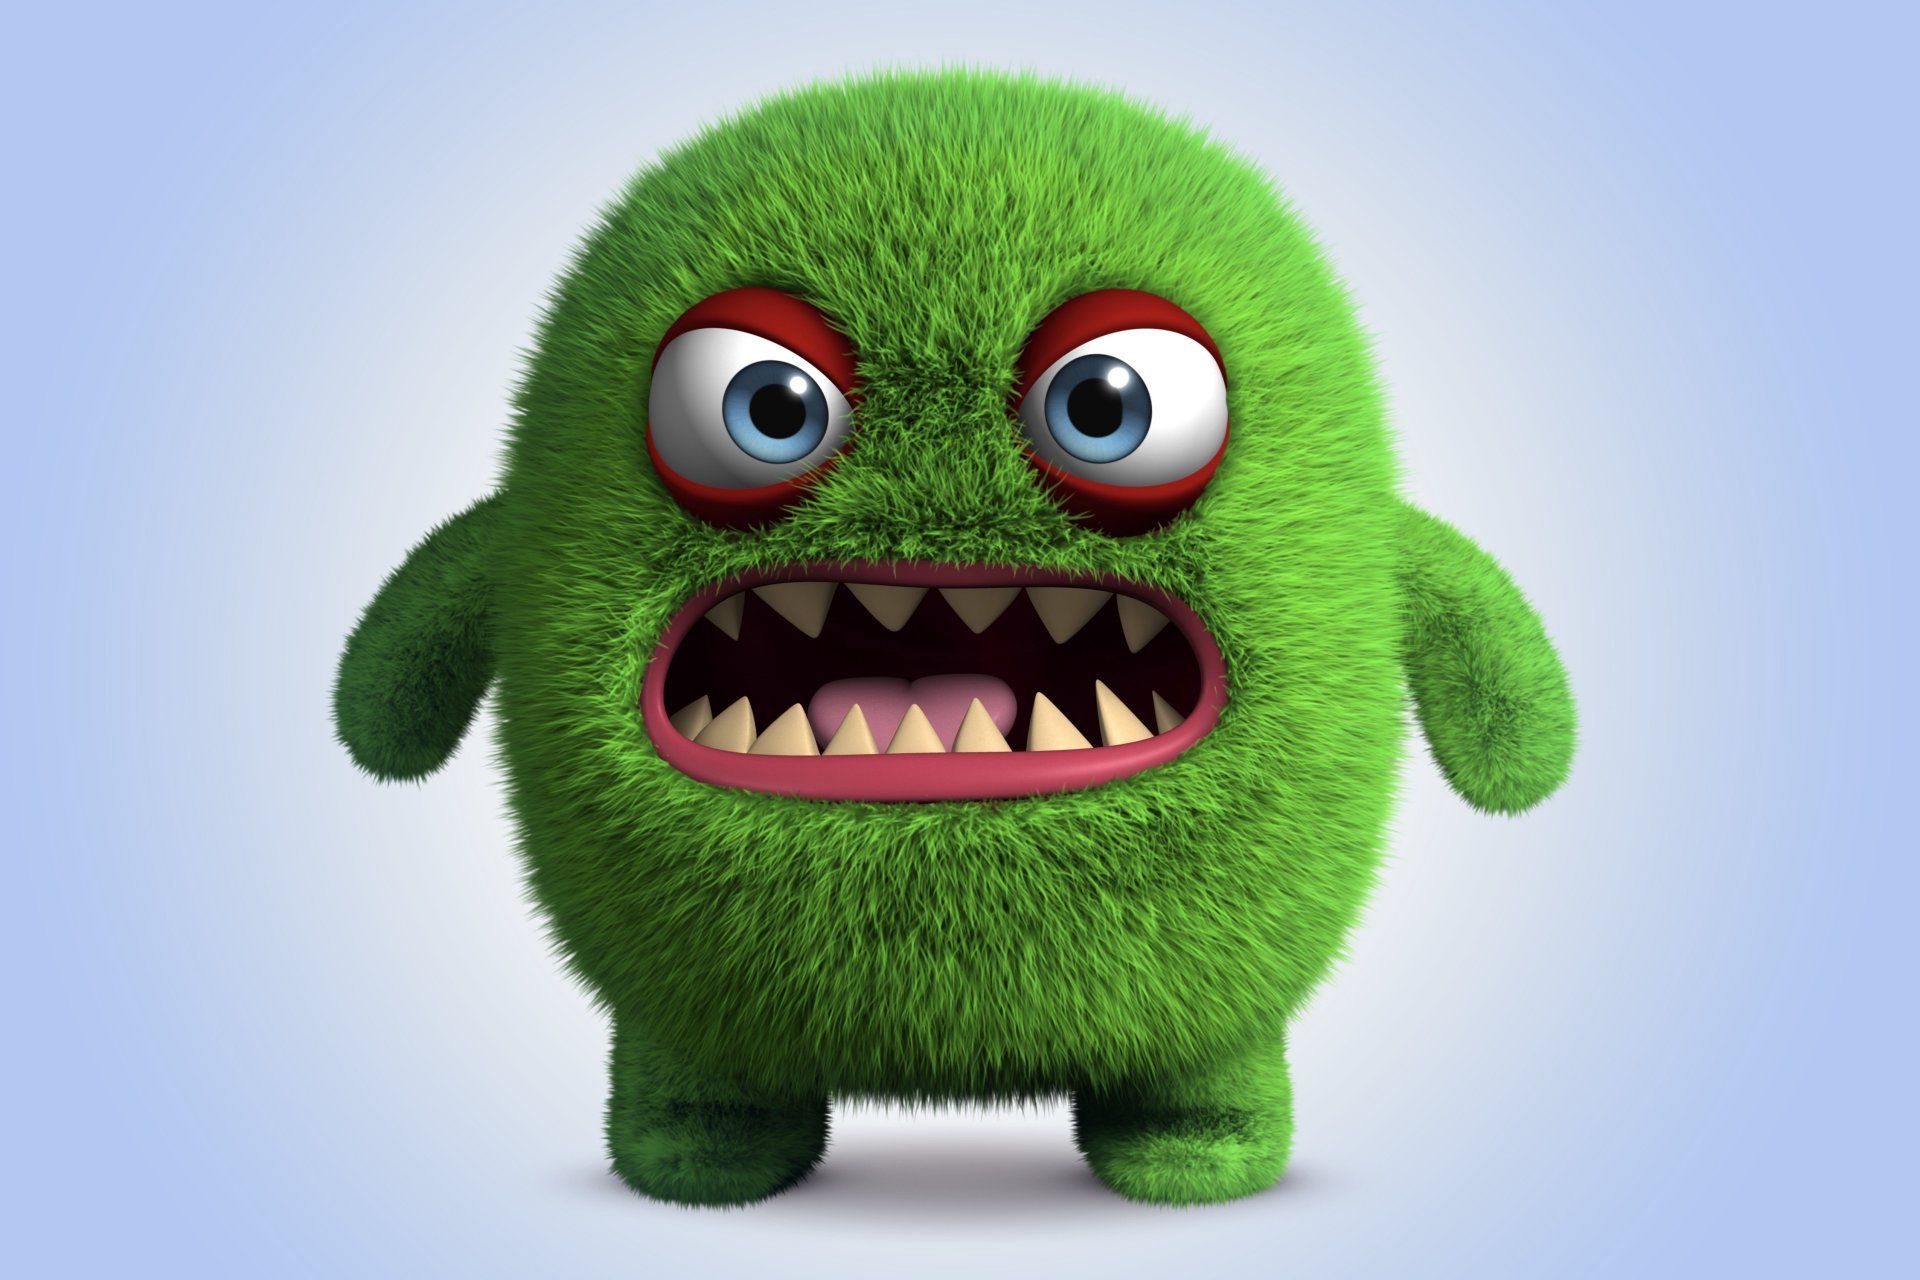 3d Funny Monster Cartoon Cute Fluffy Angry Adult Hd - Fluffy Cartoon Monsters - HD Wallpaper 